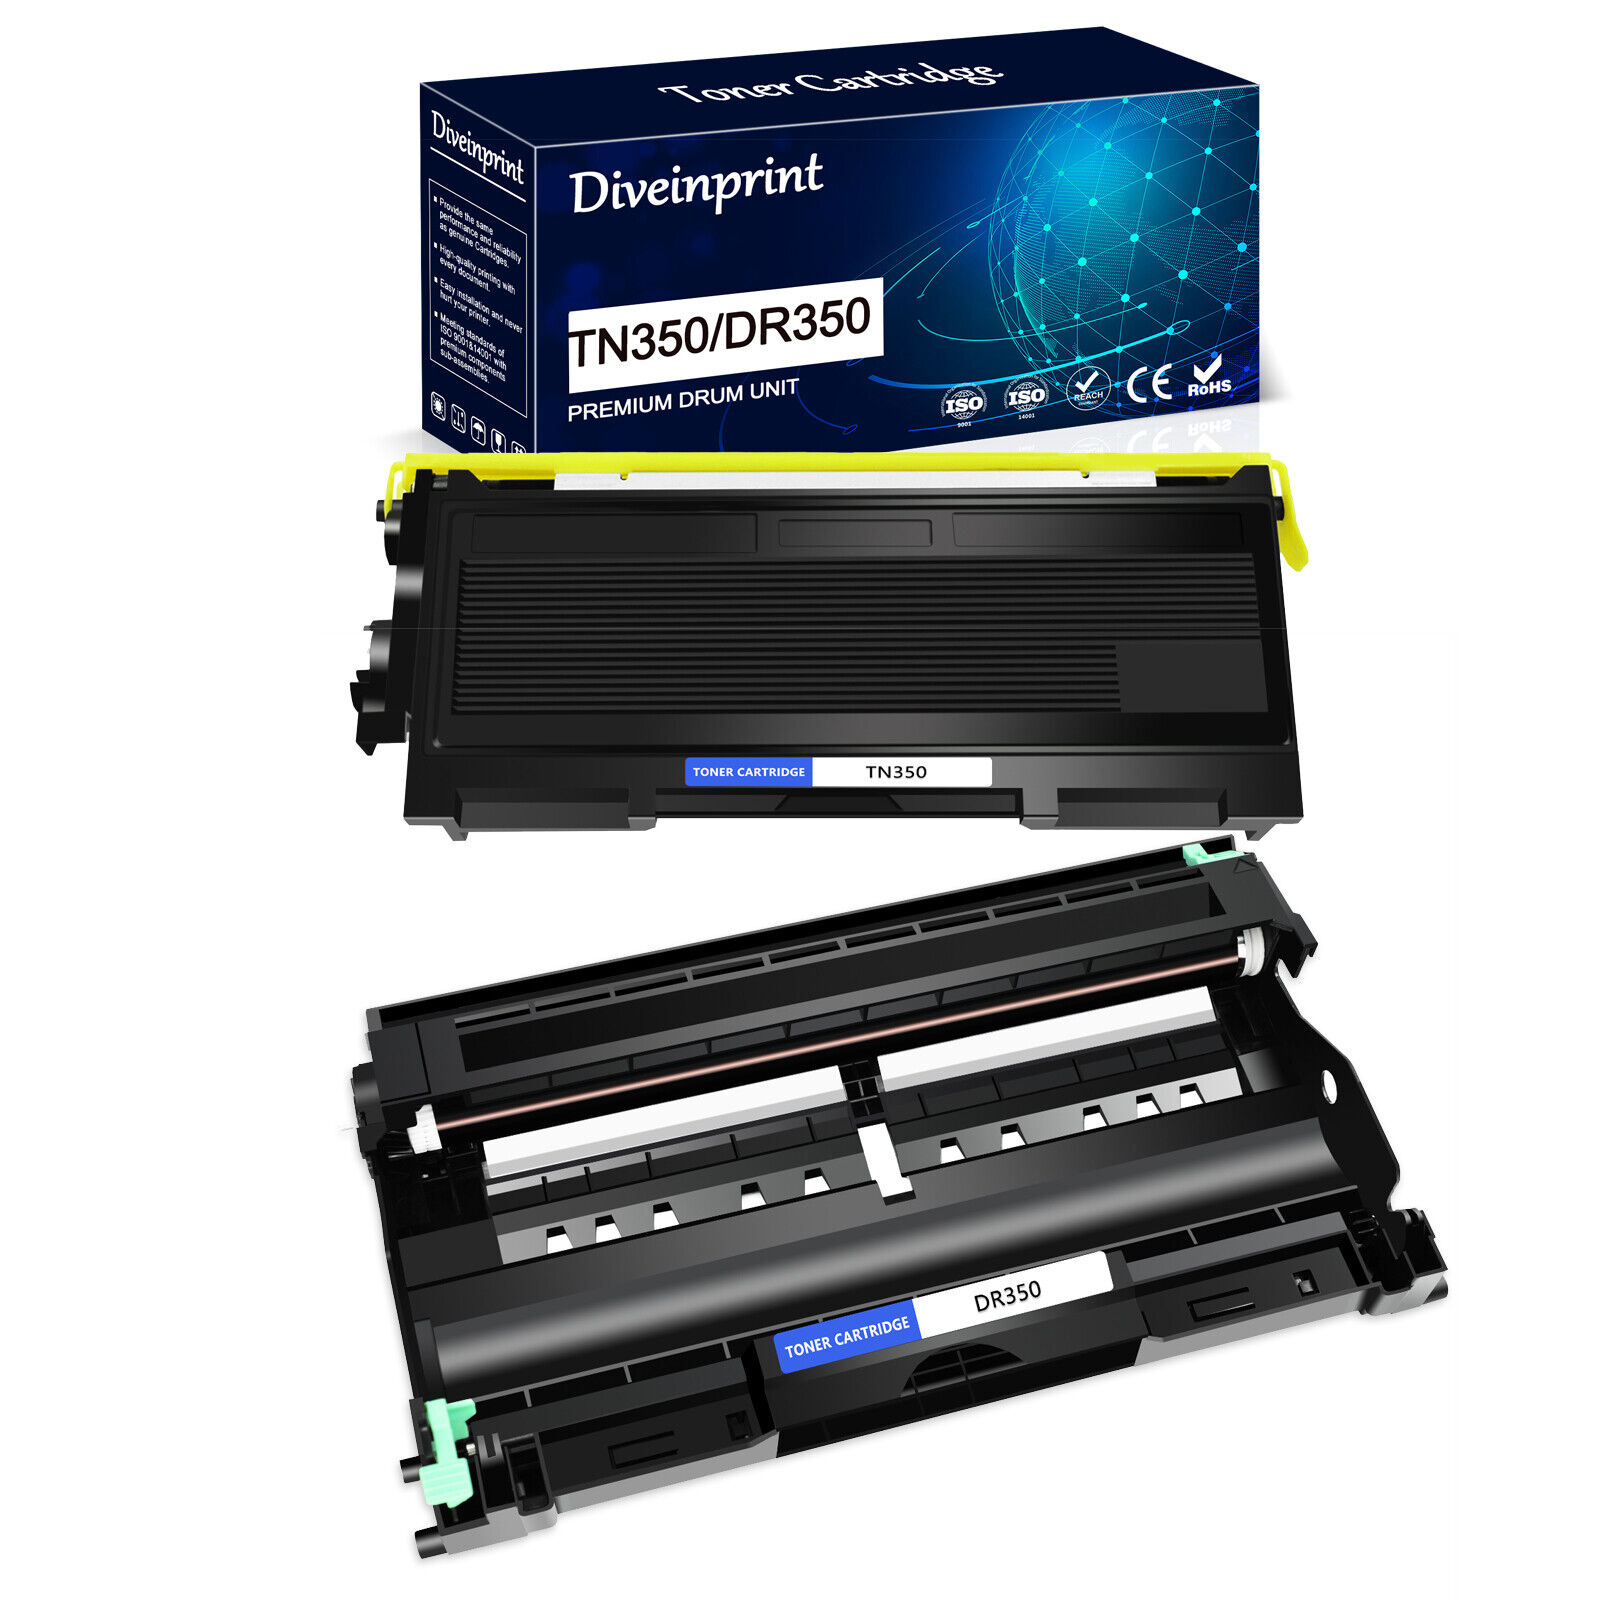 TN350 Toner & DR350 Drum Compatible With Brother MFC-7420 MFC-7820N DCP-7020  